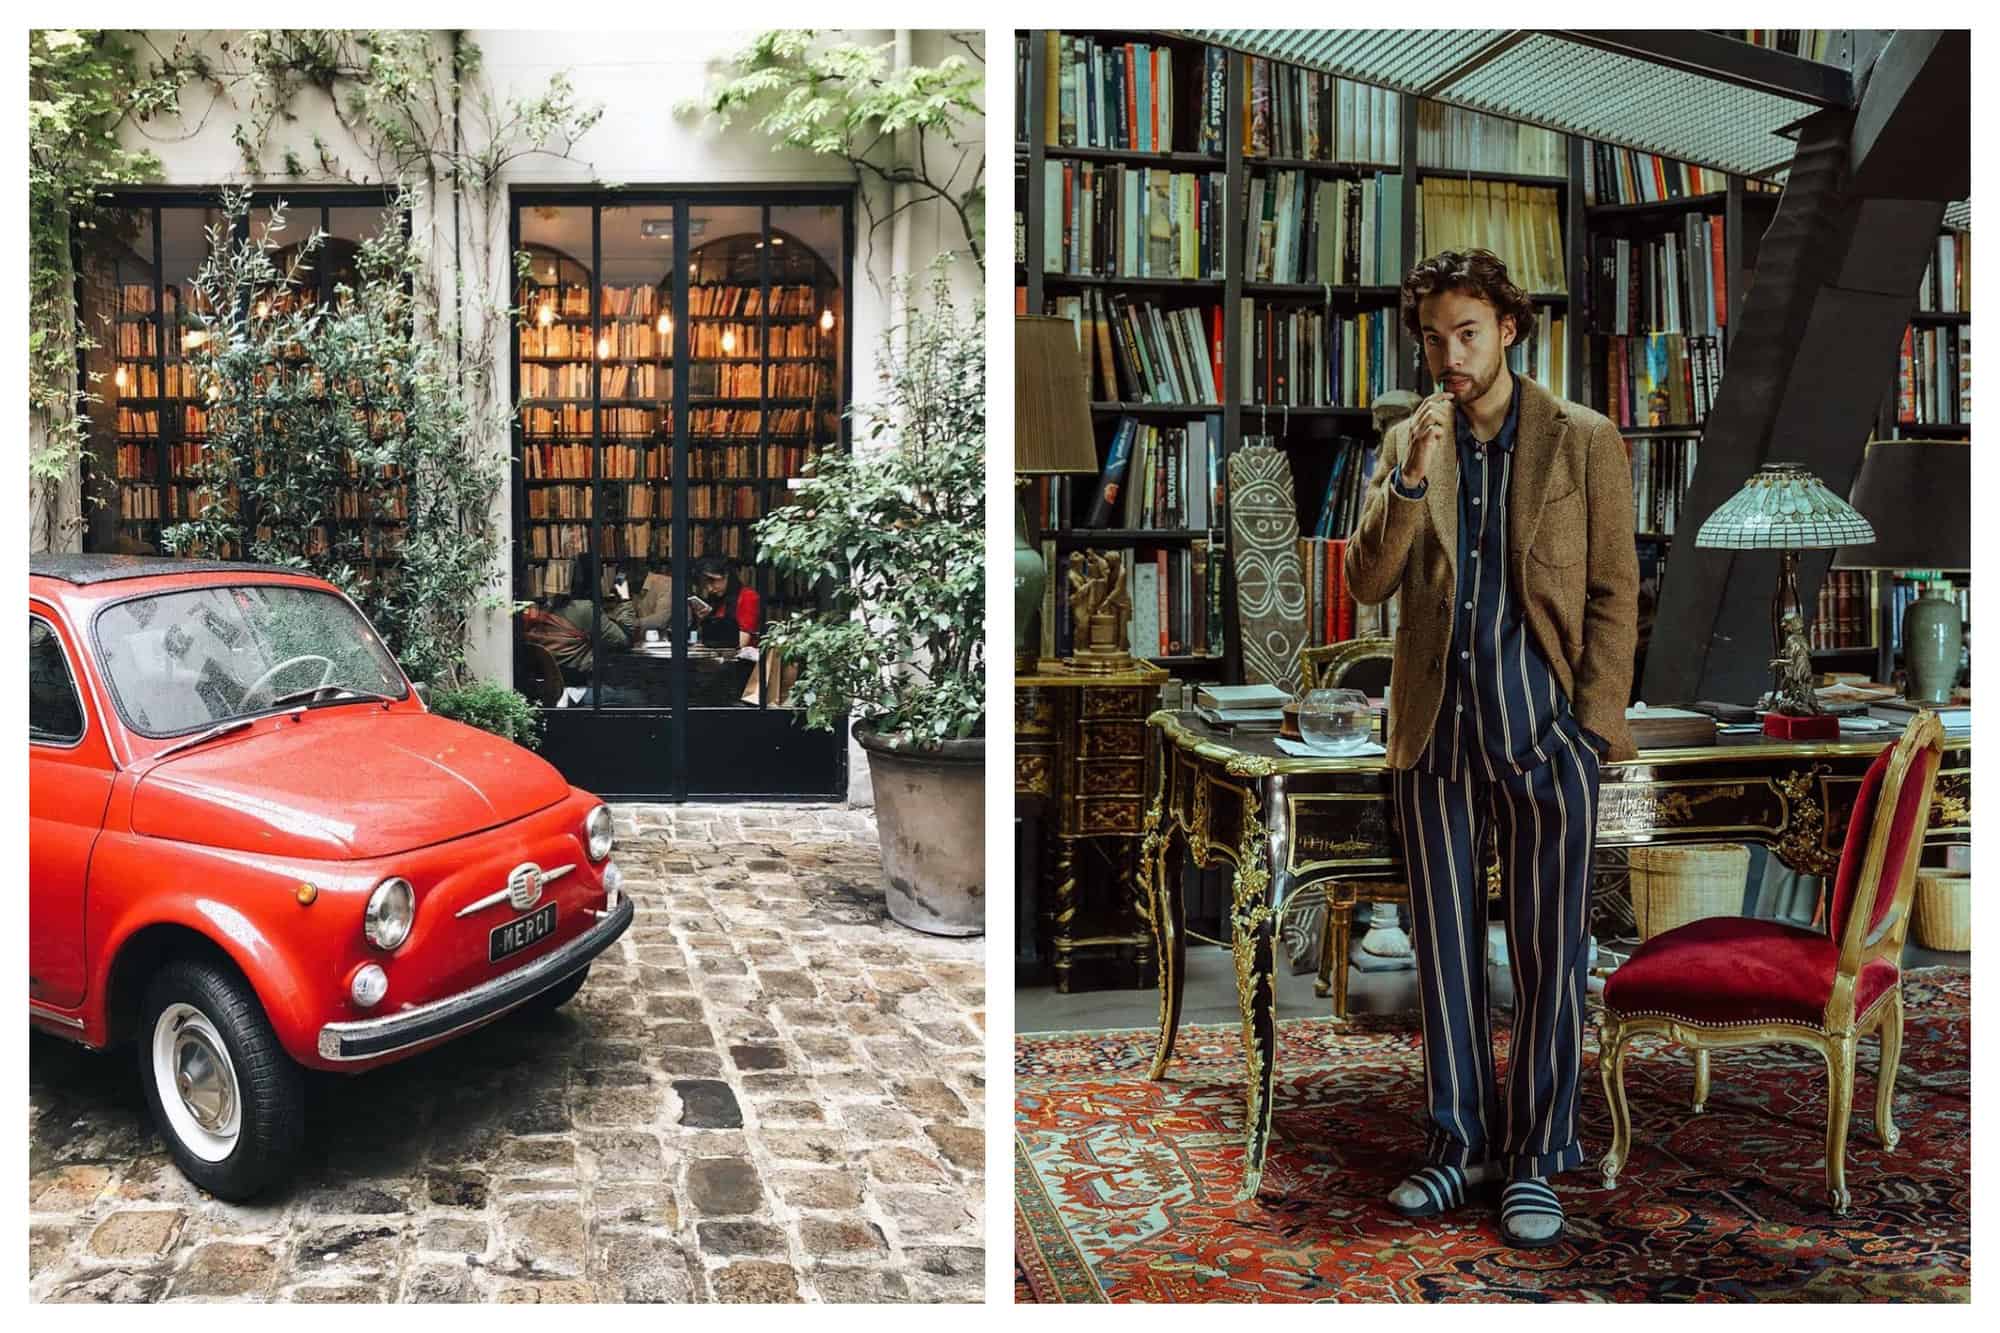 Left: A picture of the court of Merci Concept Store, located in Le Marais. It showcases a vintage red Volkswagen and its iconic coffee shop/library with beautiful glass panels can be seen behind the car. Right: A picture from Serpent à Plume, an urbane lounge with unique, cavelike architecture, that is located 2 mins away from Place des Vosges. In here, a man is seen wearing a set of pyjamas and a brown blazer while brushing his teeth in a gorgeously designed office.